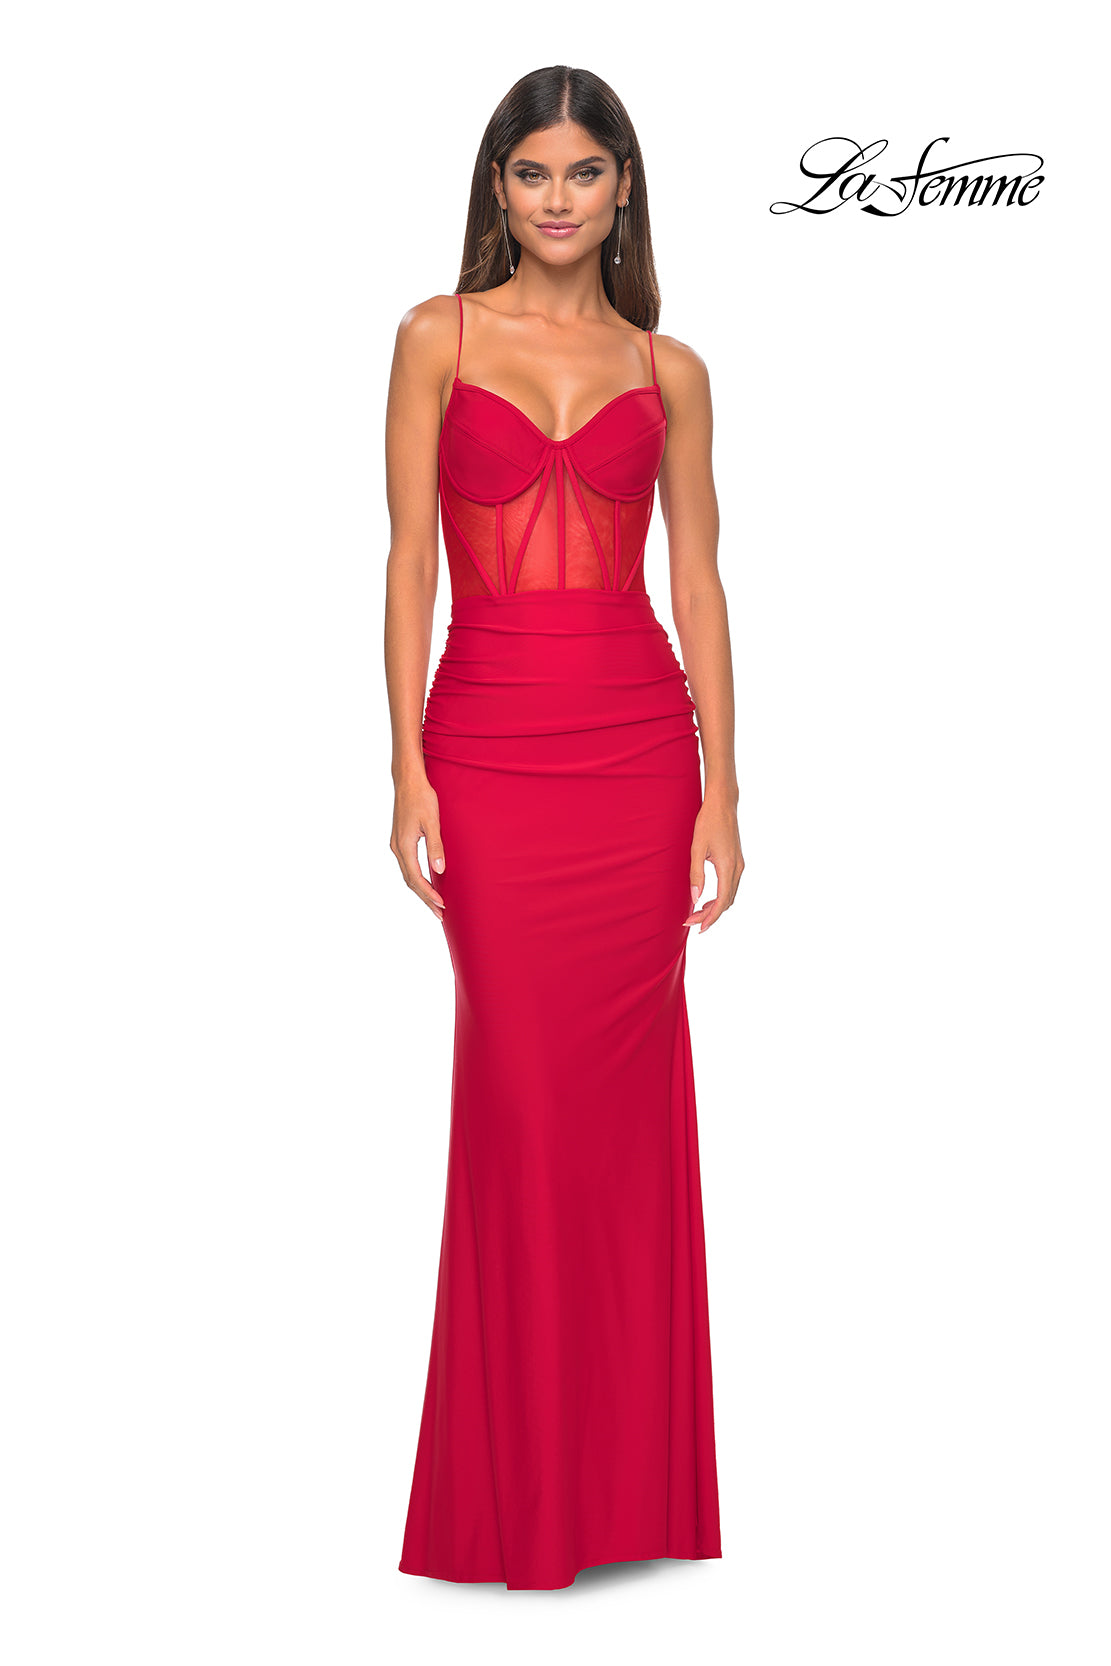 La Femme 32258 Sweetheart Neckline Lace up Back Corset Jersey Fitted Evening Dress